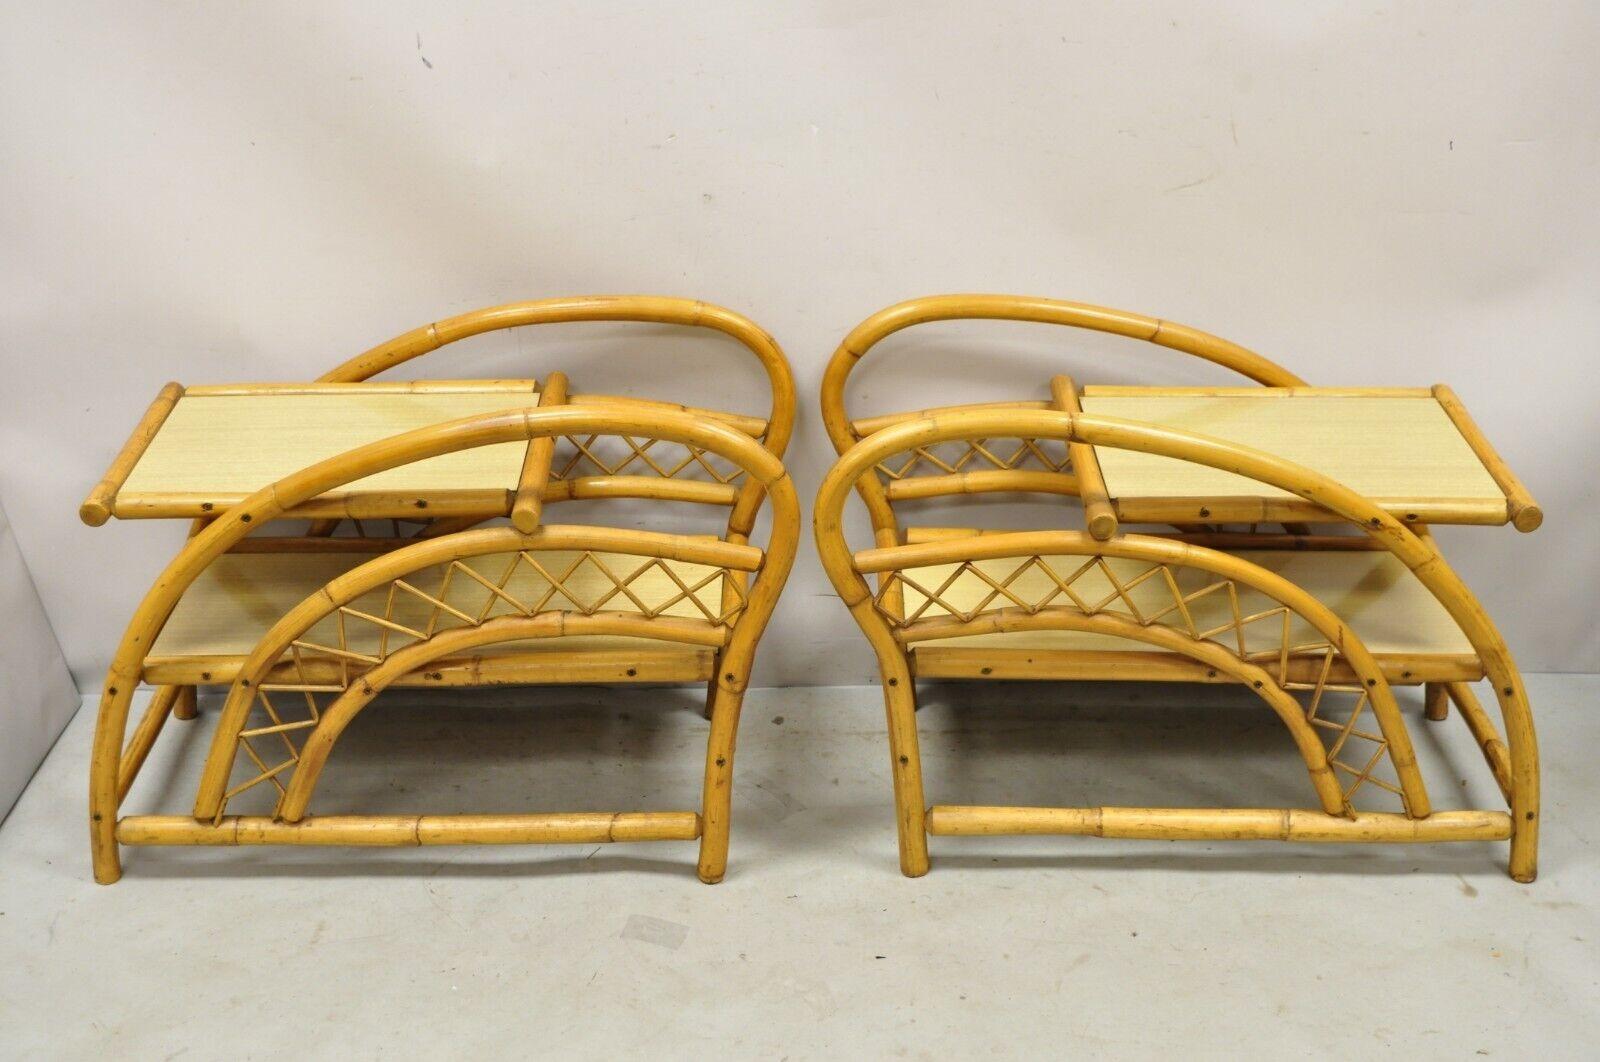 Vintage Tiki Rattan Bentwood Bamboo 2 Tier Sculptural End Tables - a Pair For Sale 5